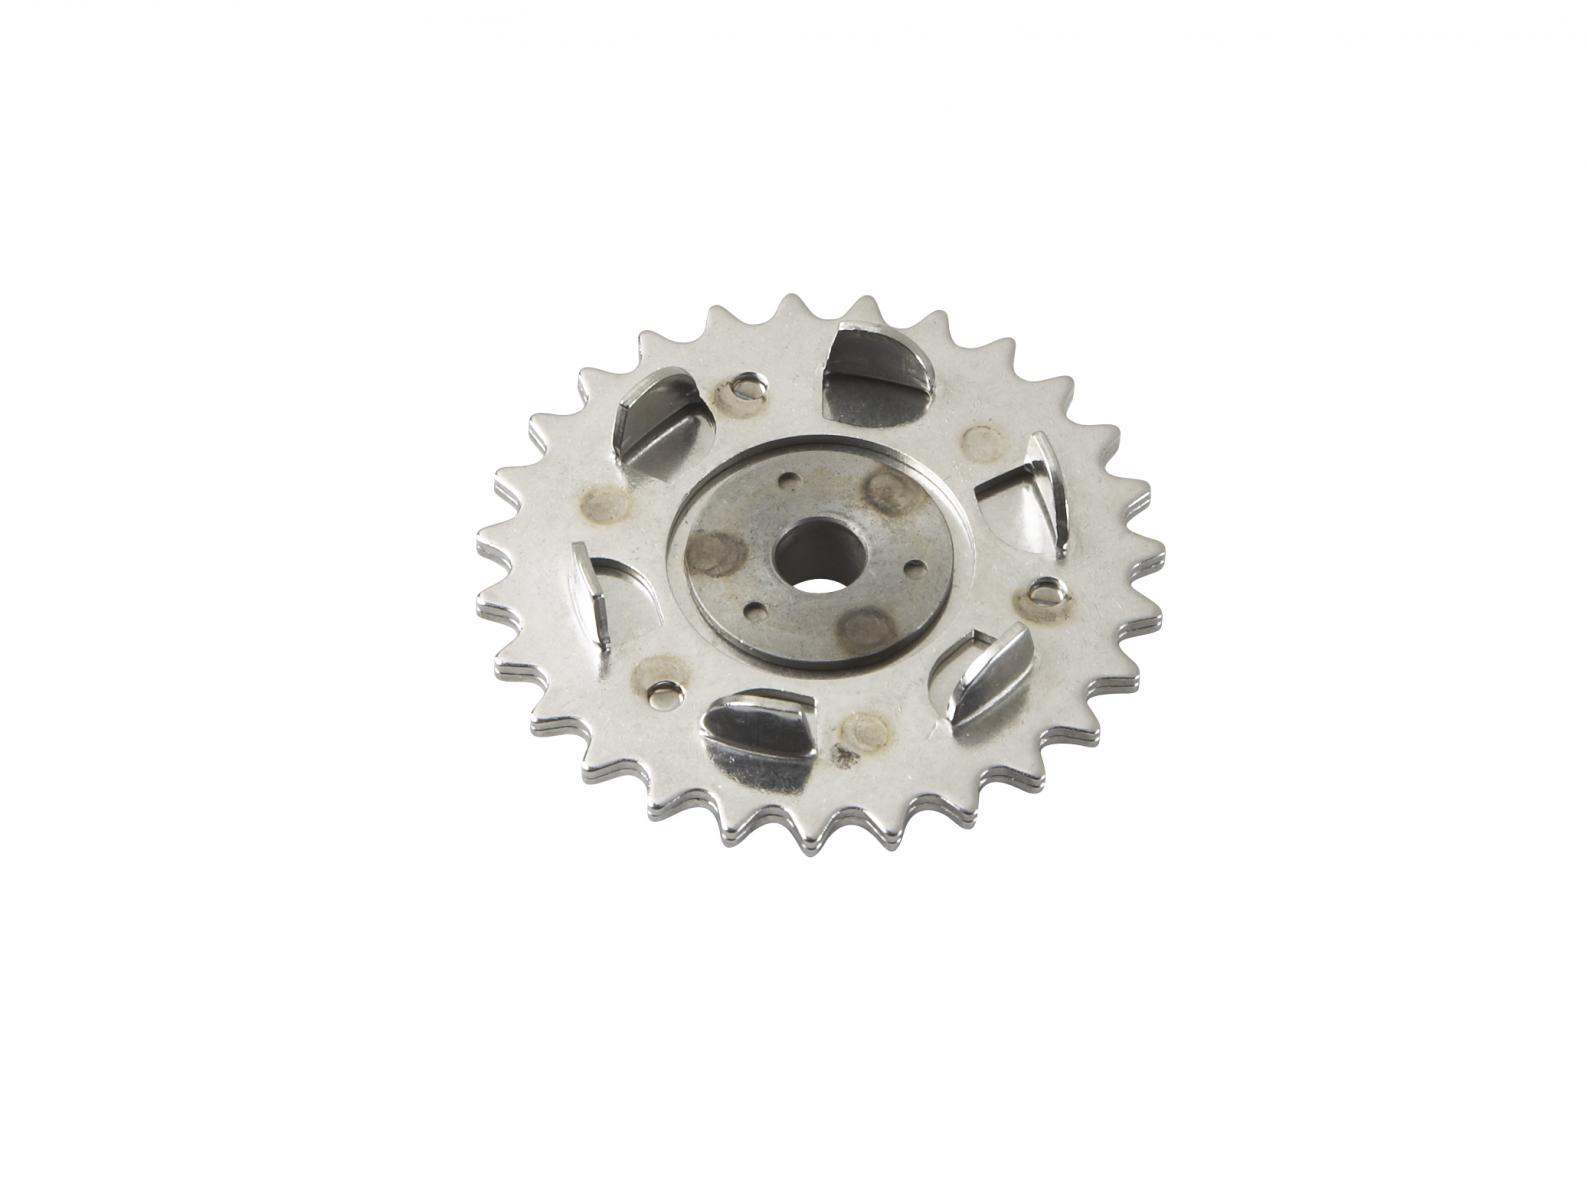 TapeTech® Sprocket Assembly. Part number 054114F